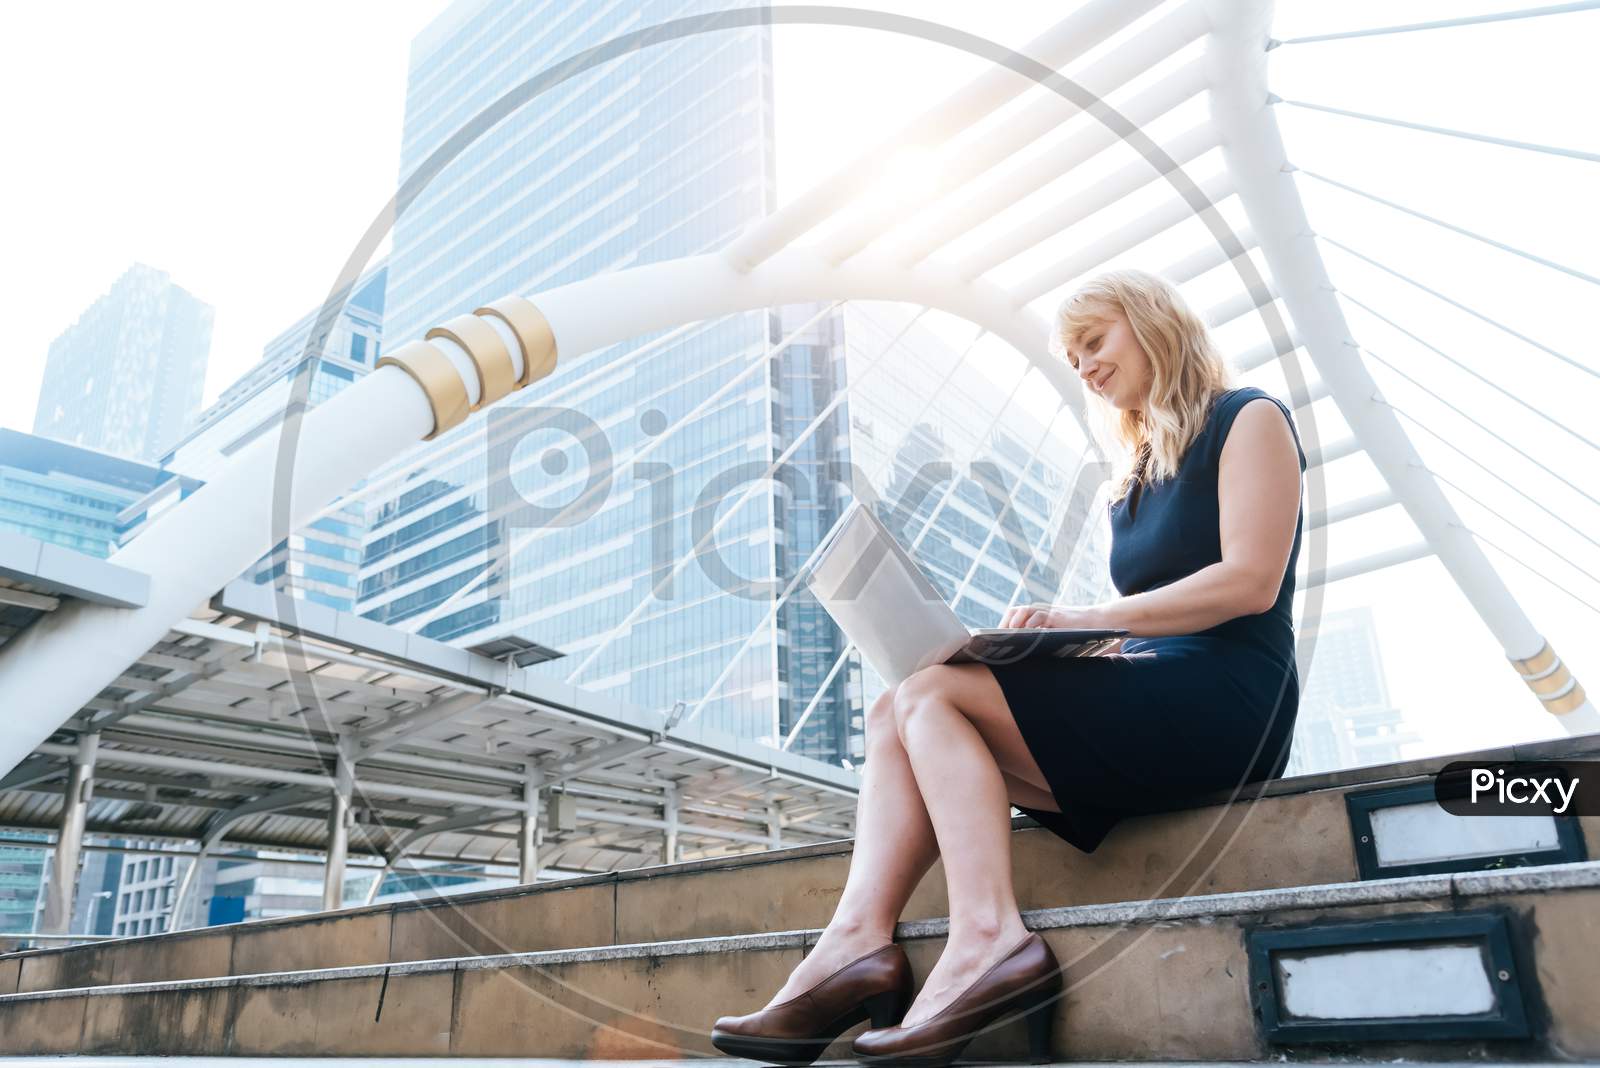 Business Woman Working With Laptop At Outdoors. Technology And Happiness Concept. Beauty And Lifestyle Concept. City And Urban Theme. Blonde Hair Woman Using Computer